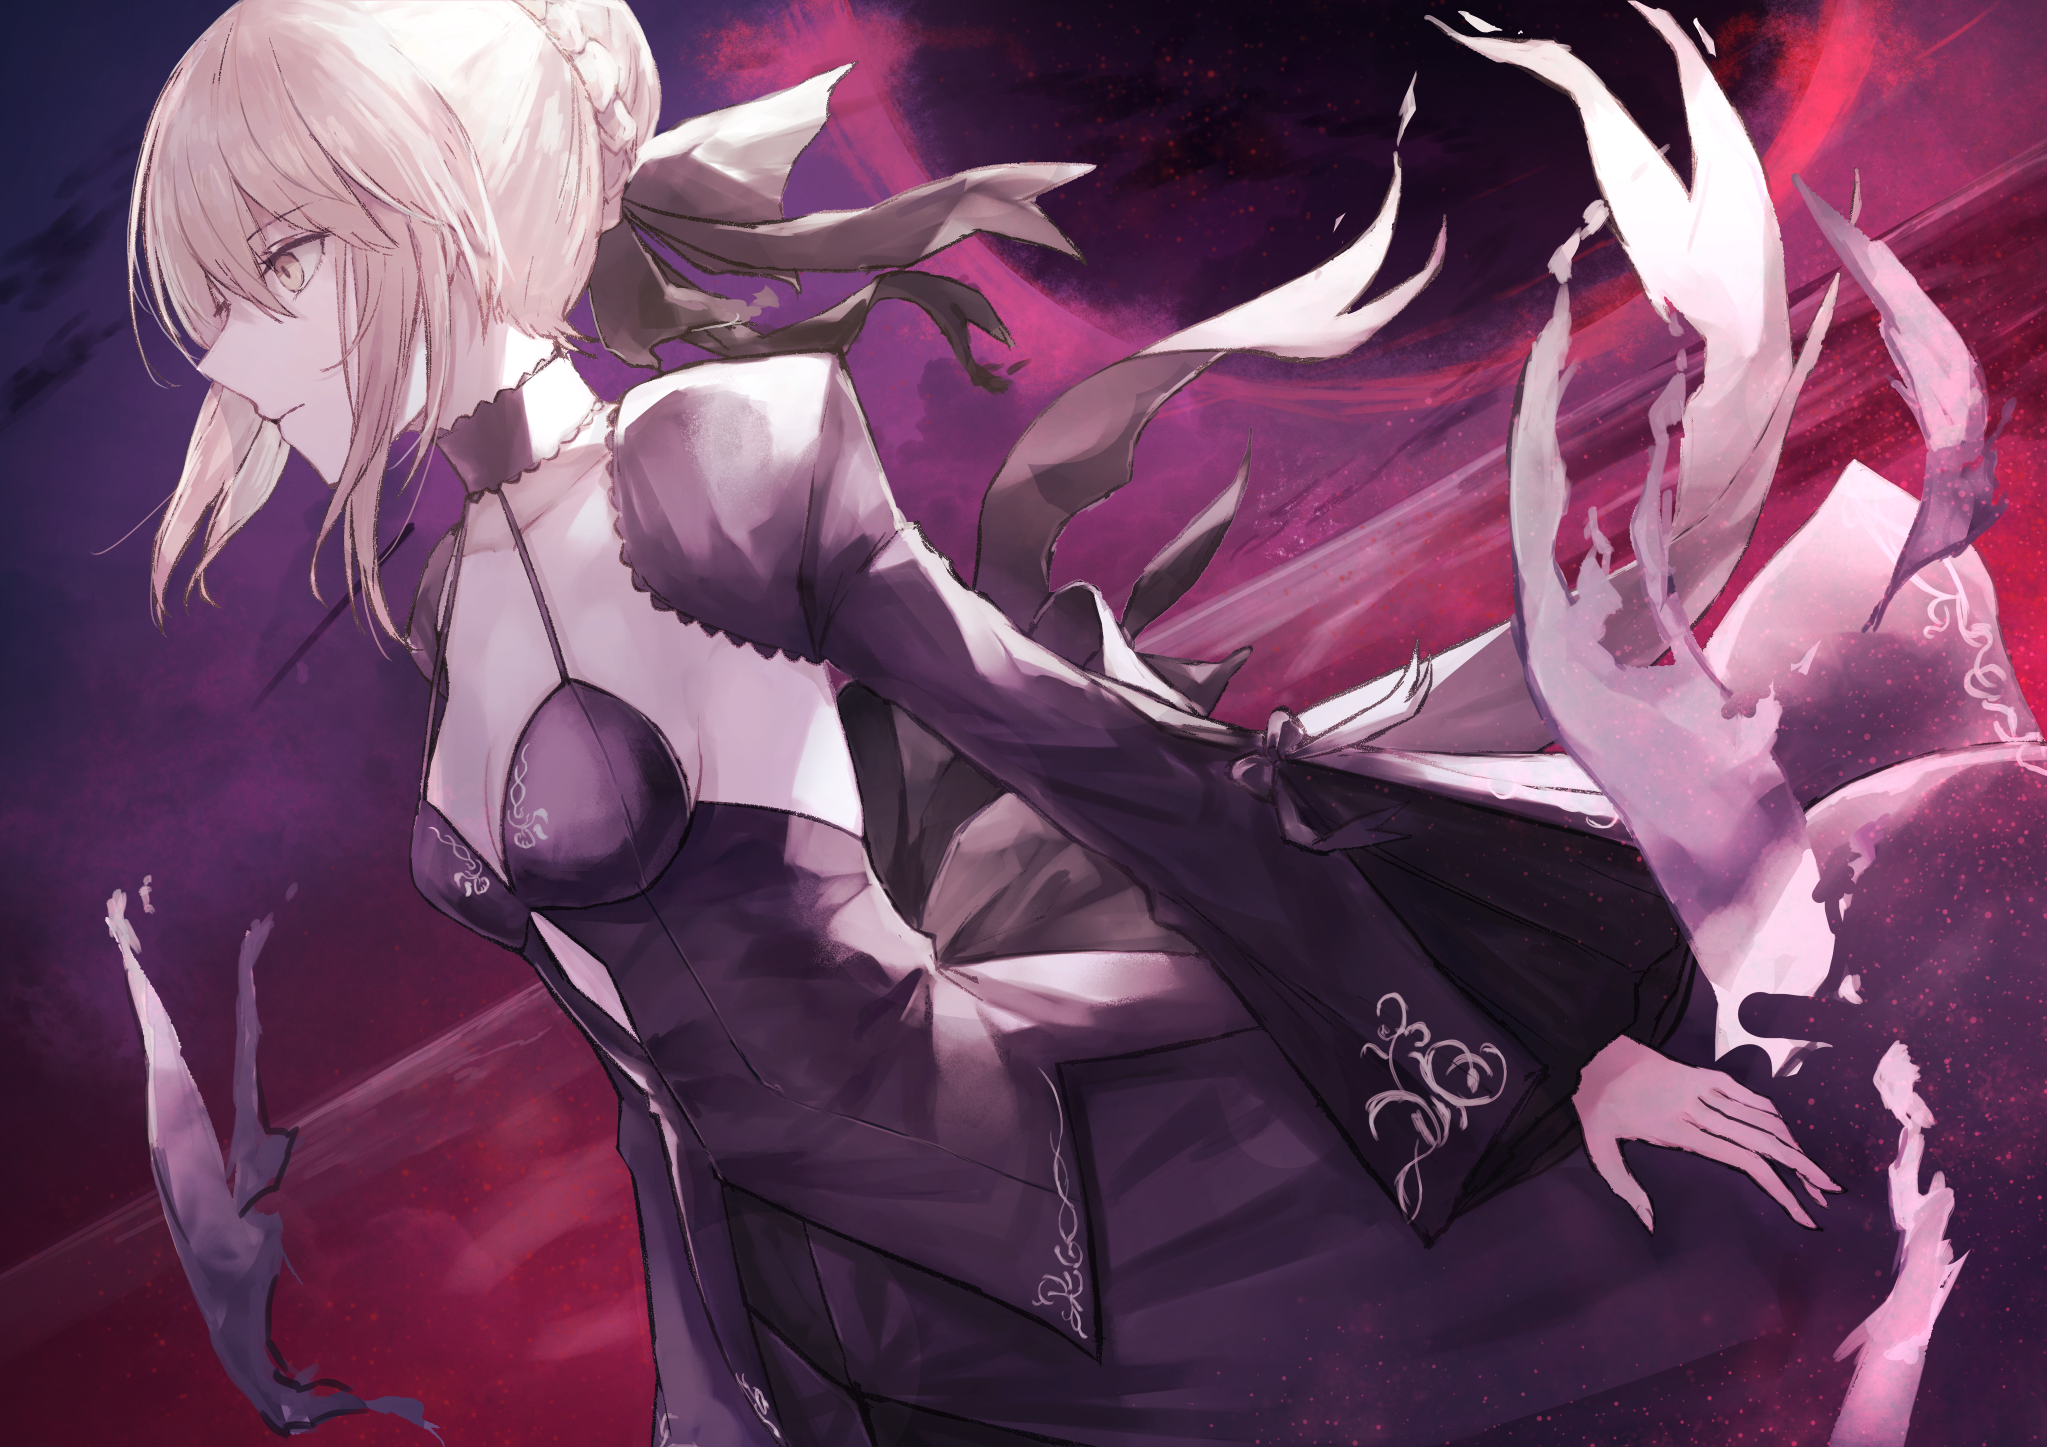 Anime 2047x1447 anime anime girls Fate/Grand Order Saber Alter Fate series Fate/Stay Night